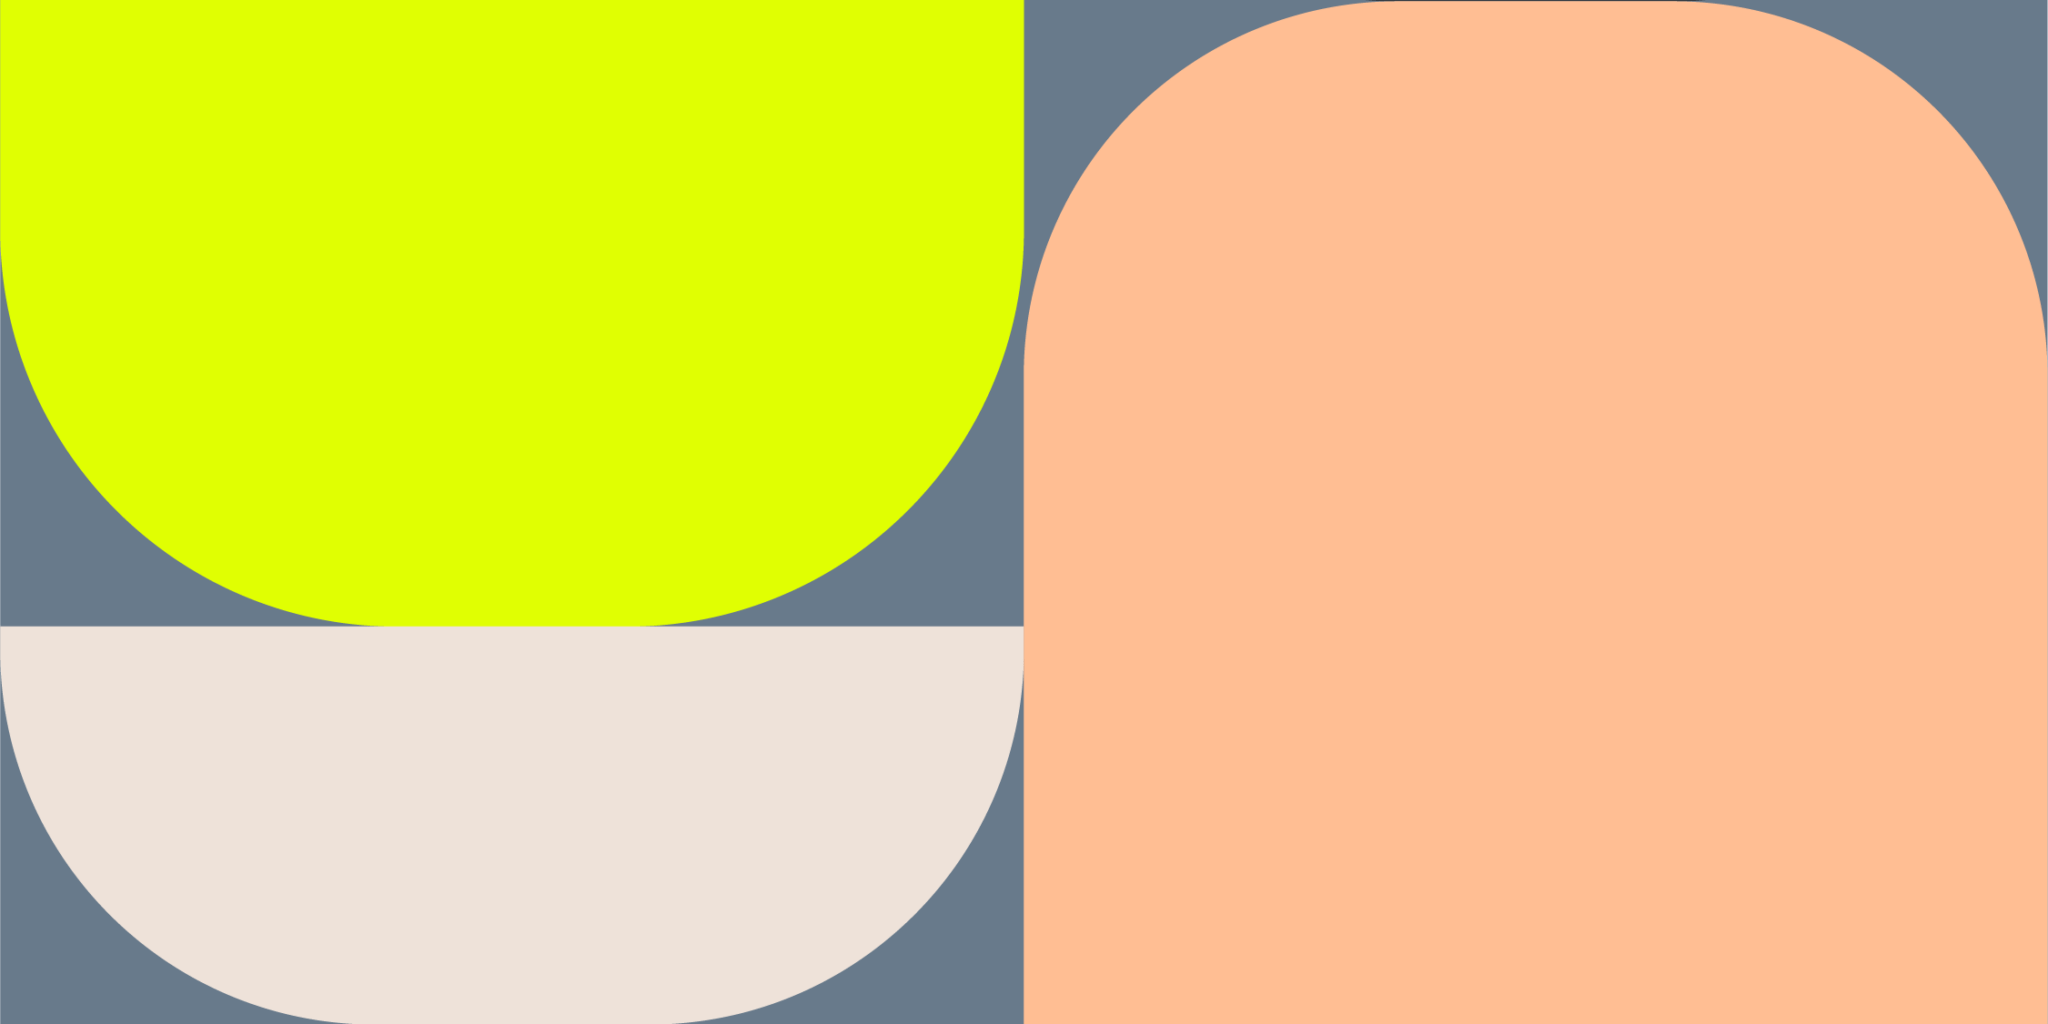 Brand colours arranged in a pattern. The colour palette includes: Slate Blue (#687A8B), Gunmetal (#2C363F), Apricot (#FFBE93), Light Almond (#EEE2D9), and Chartreuse (#E0FF02).